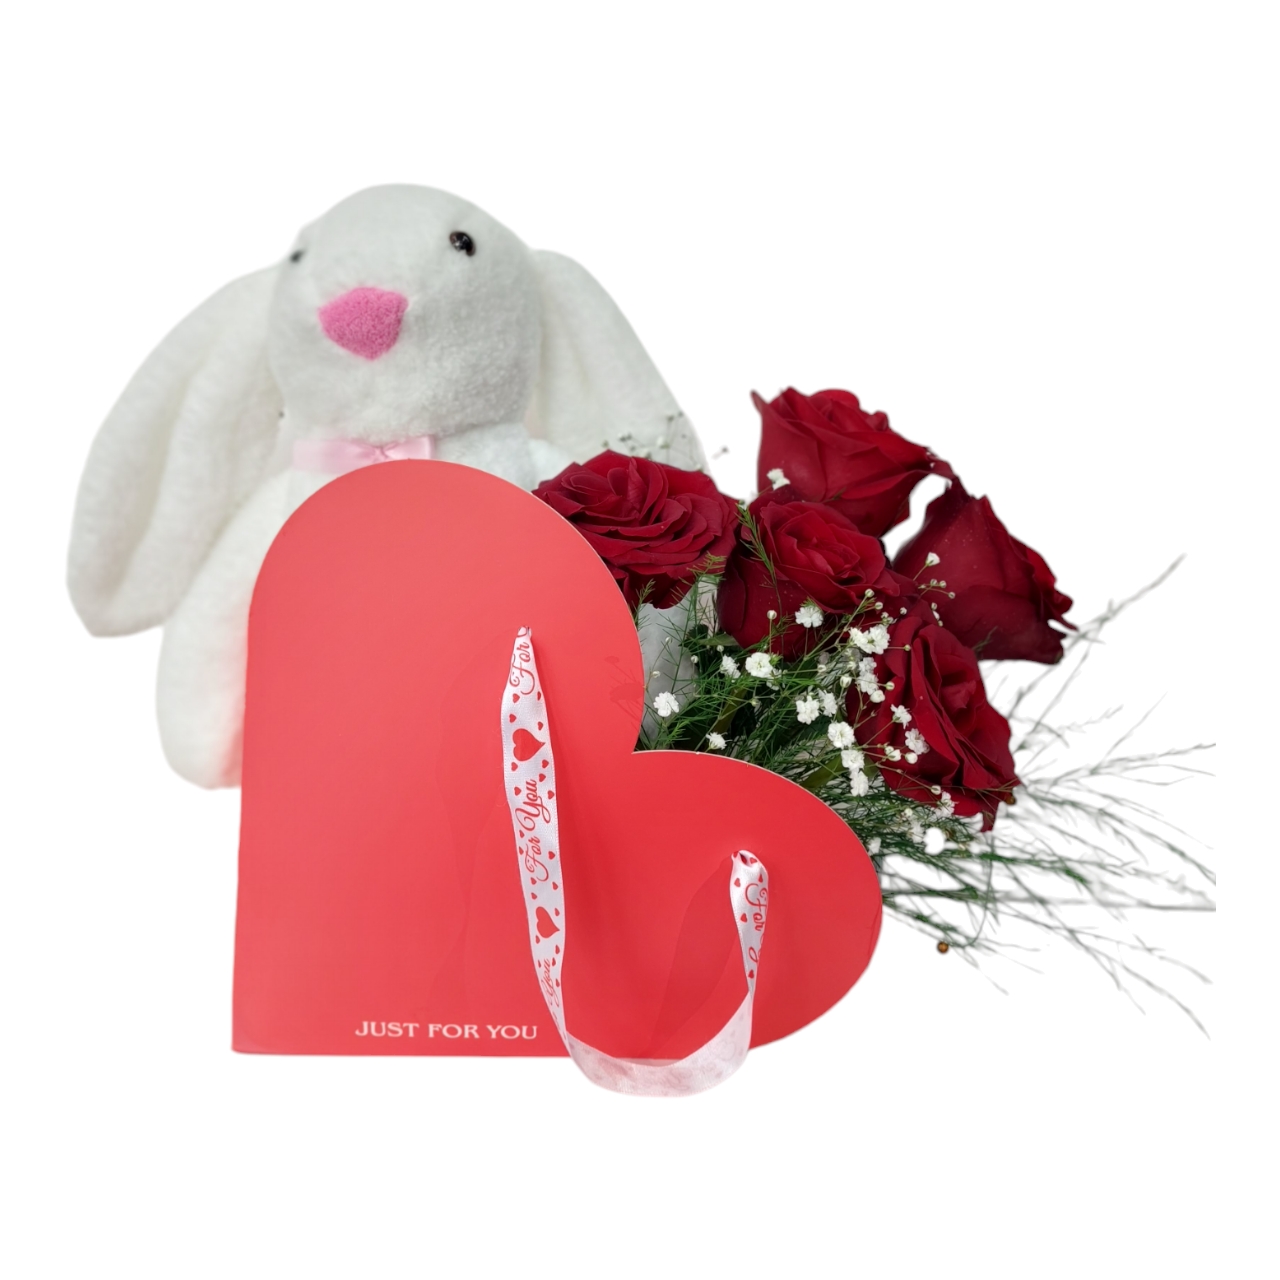 Cute%20Rabbit%20and%20Red%20Roses%20in%20a%20Red%20Heart%20Flower%20Bag